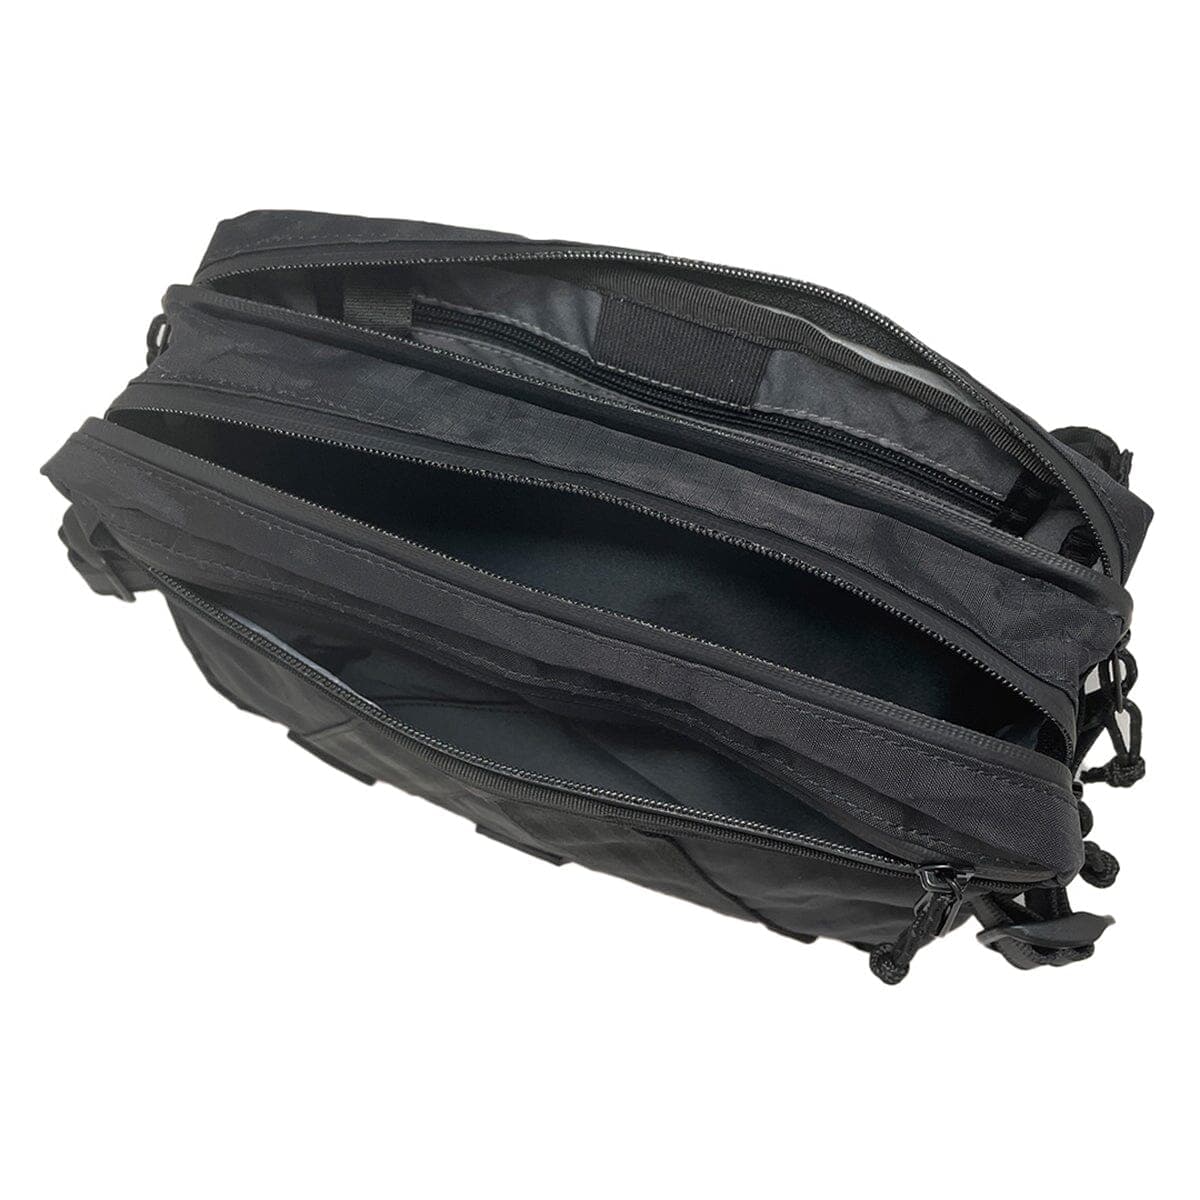 Tensile Sling bag with pockets open